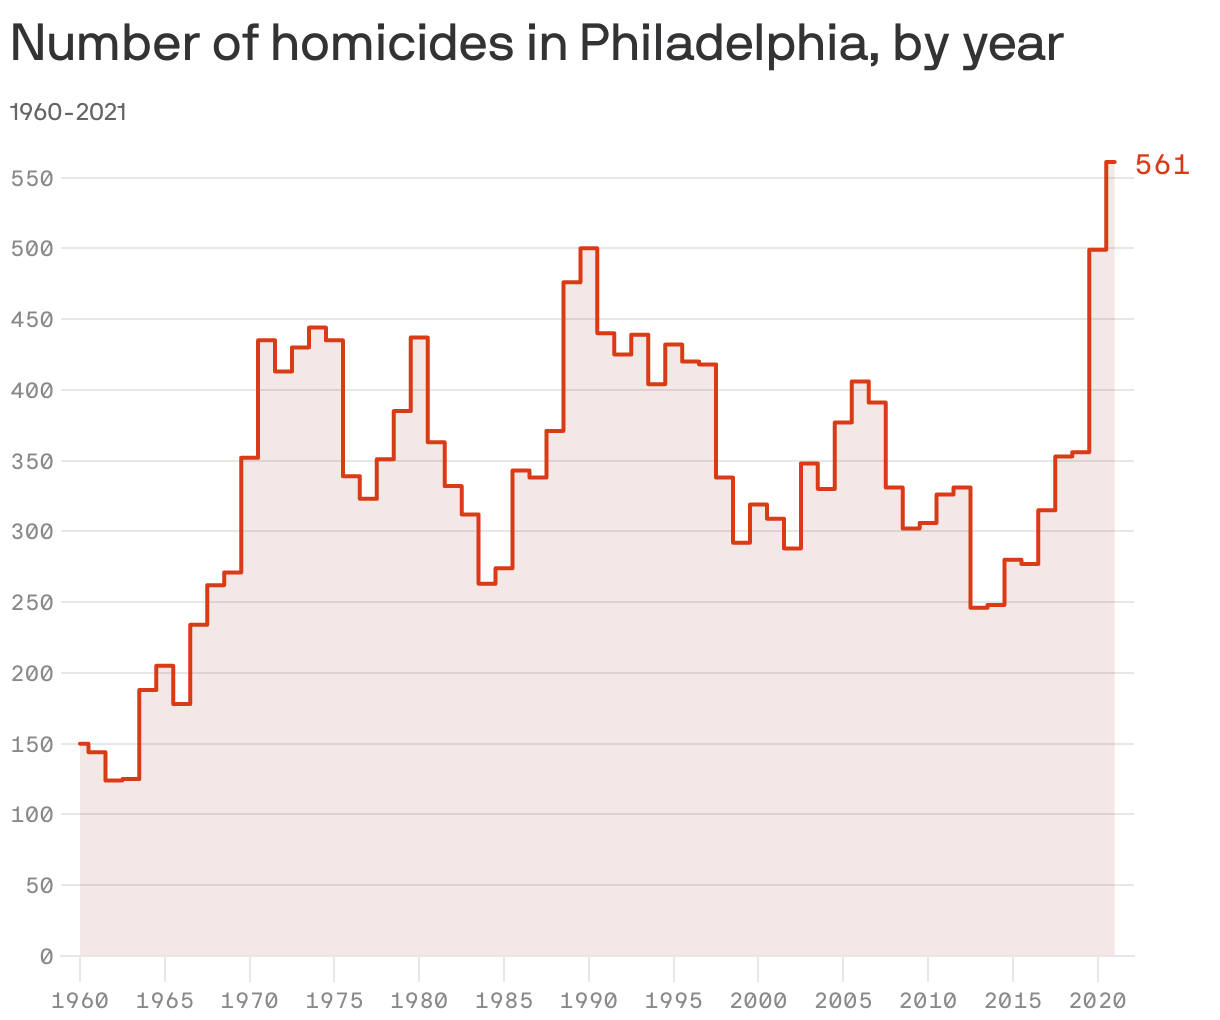 Number of homicides in Philadelphia, by year